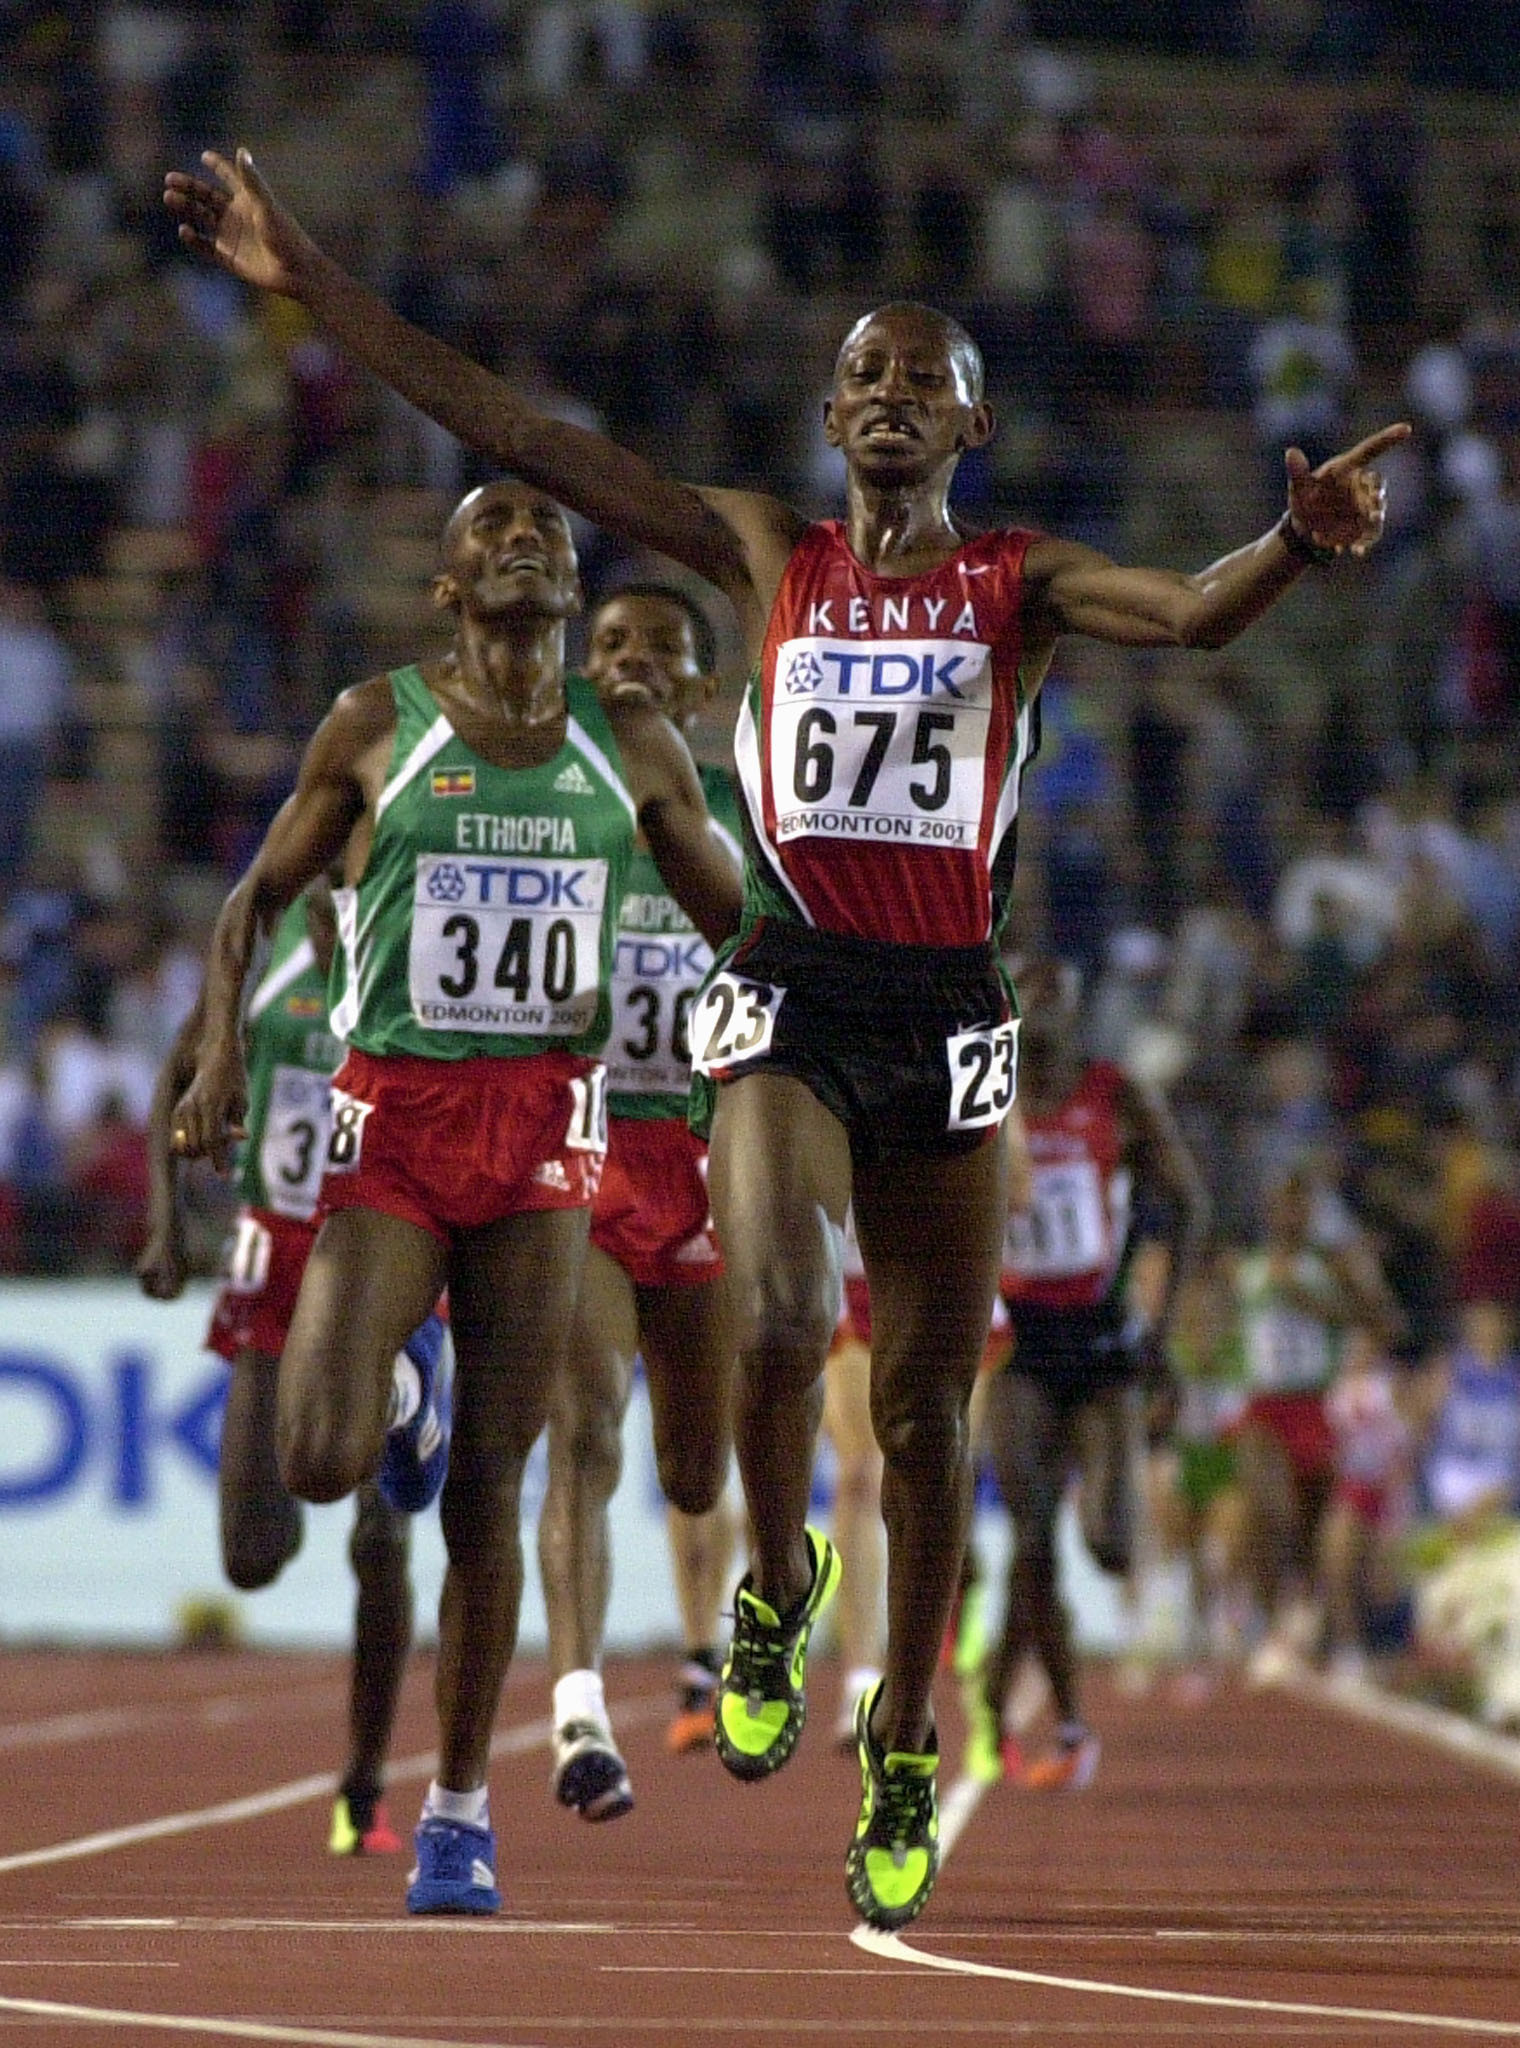 Charles Kamathi secured Kenya their last World Championships 10,000m gold medal, in 2001 ©Getty Images